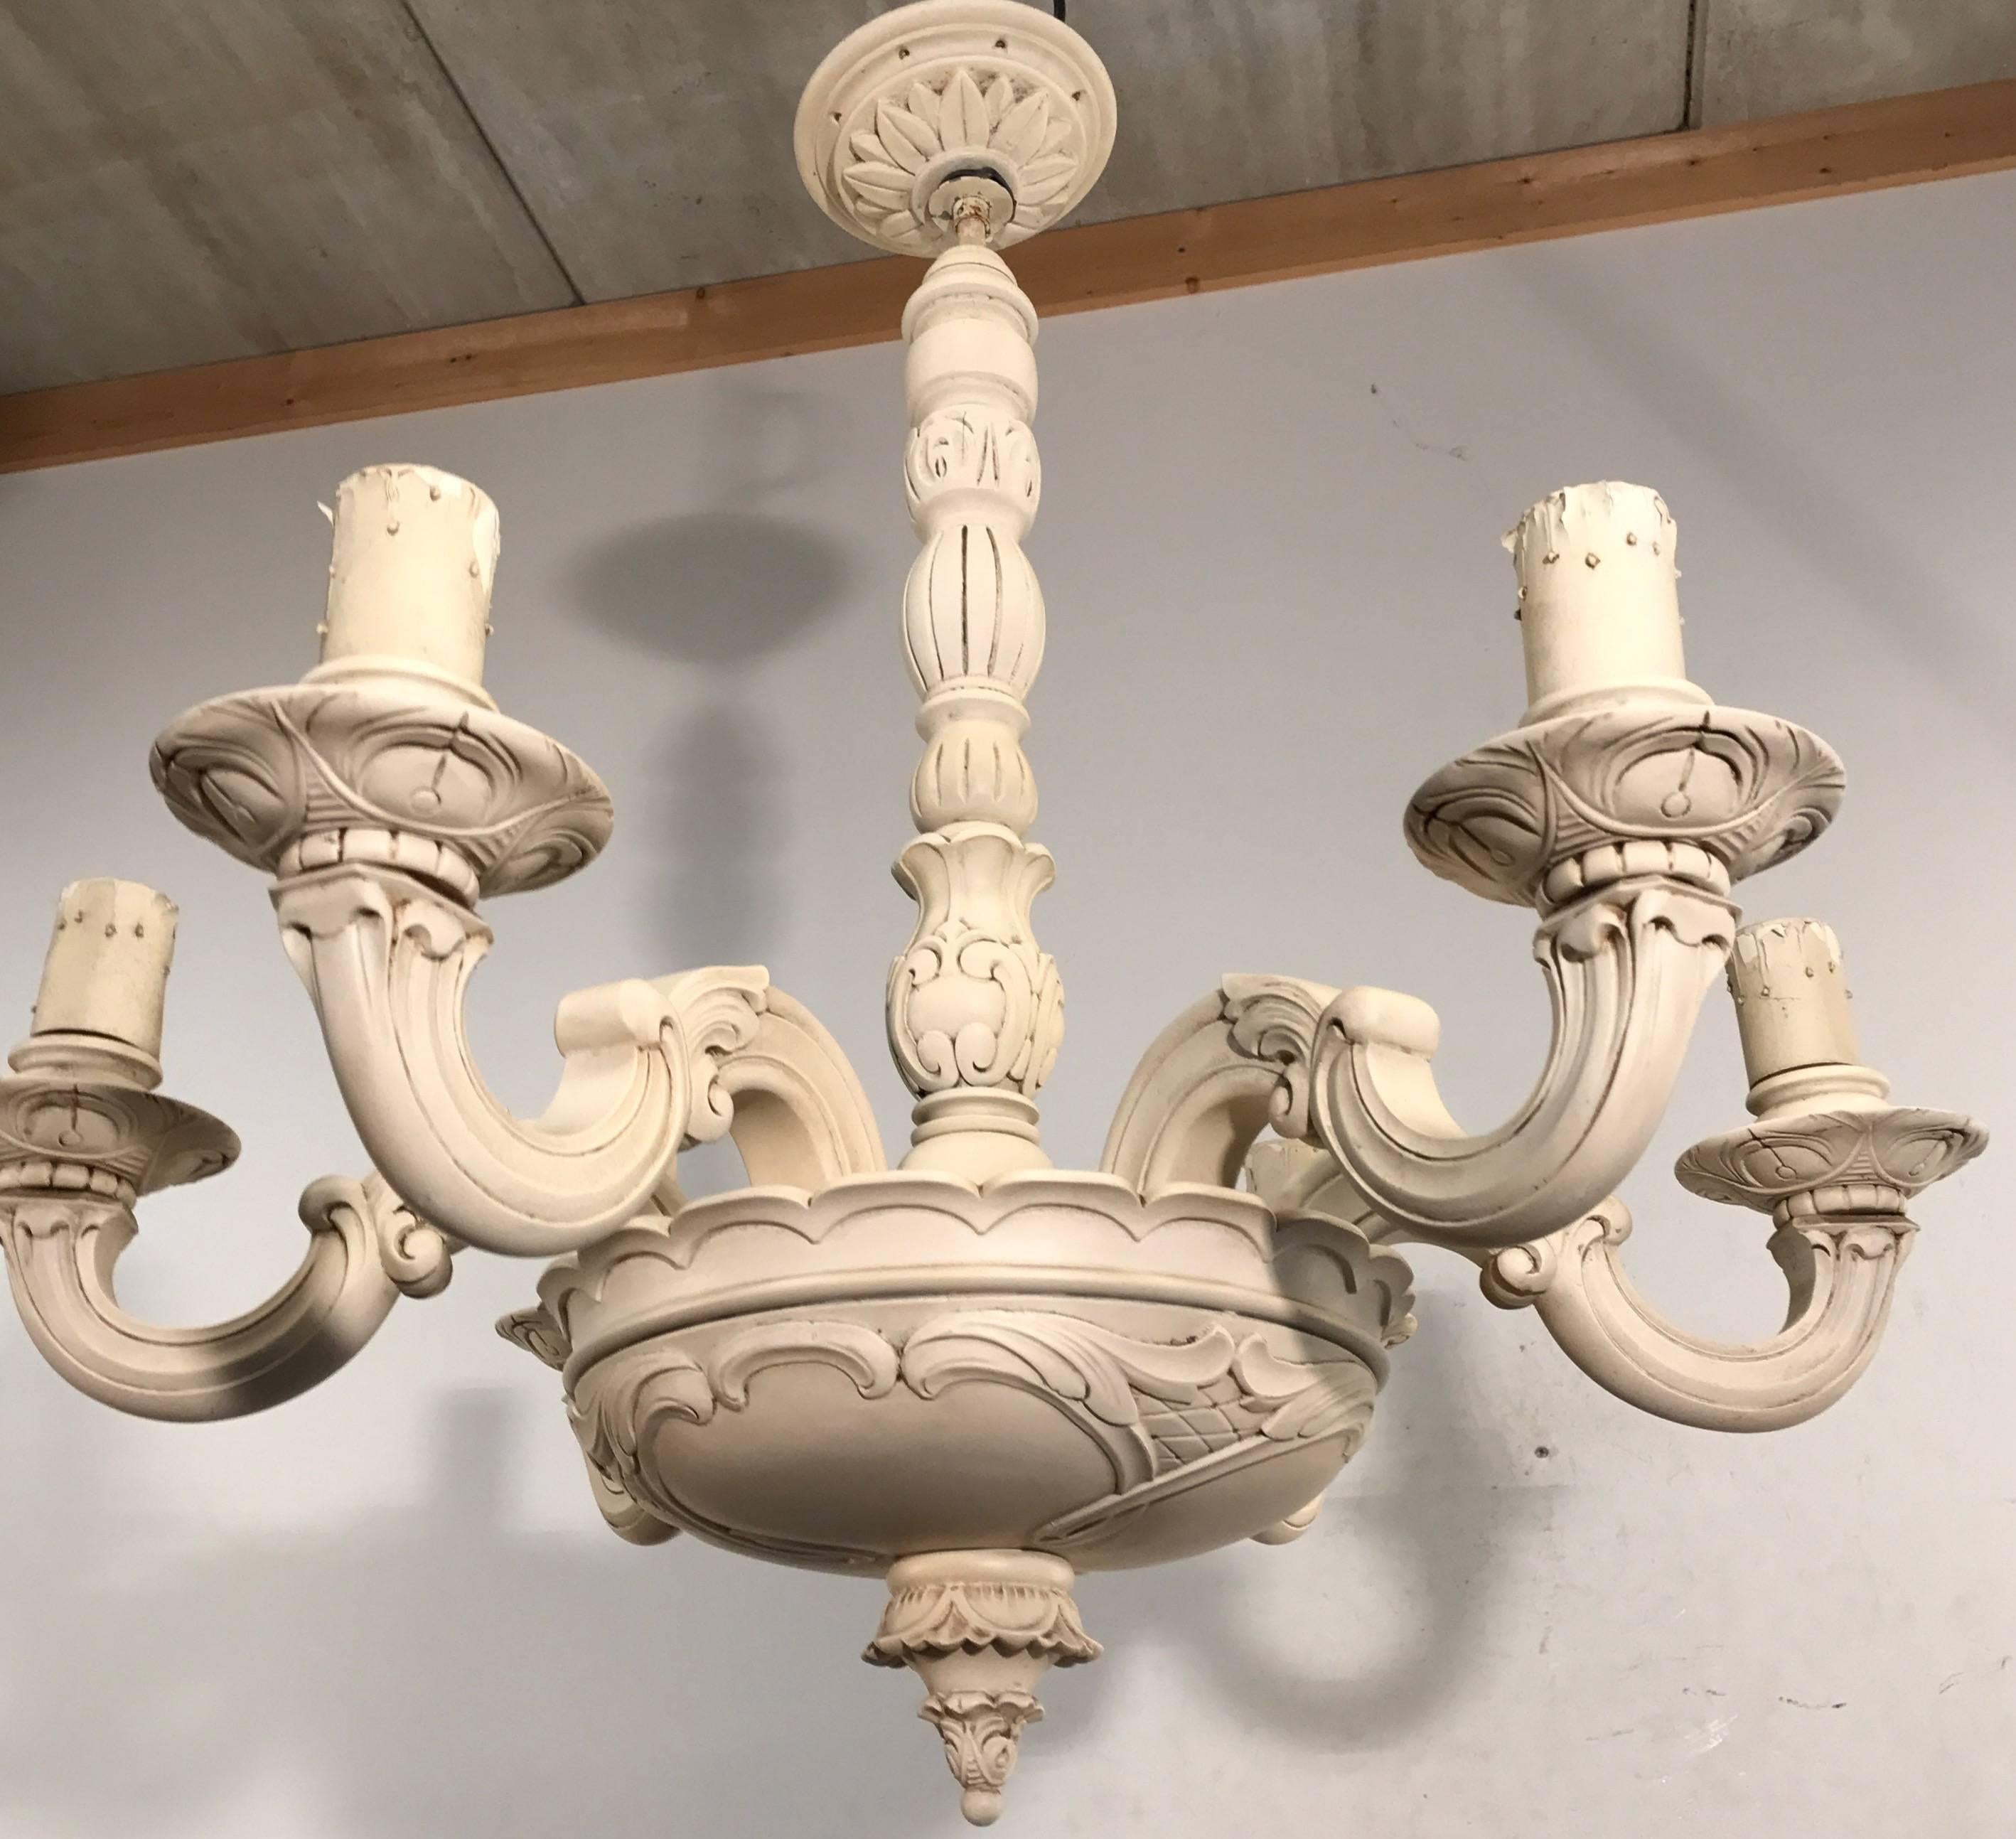 Stylish and all handcrafted chandelier from the turn of the century. 

This good quality pendant of a 100 years old has six perfectly and evenly hand-carved arms. This stylish example of turn of the century workmanship is made of solid, nutwood wood